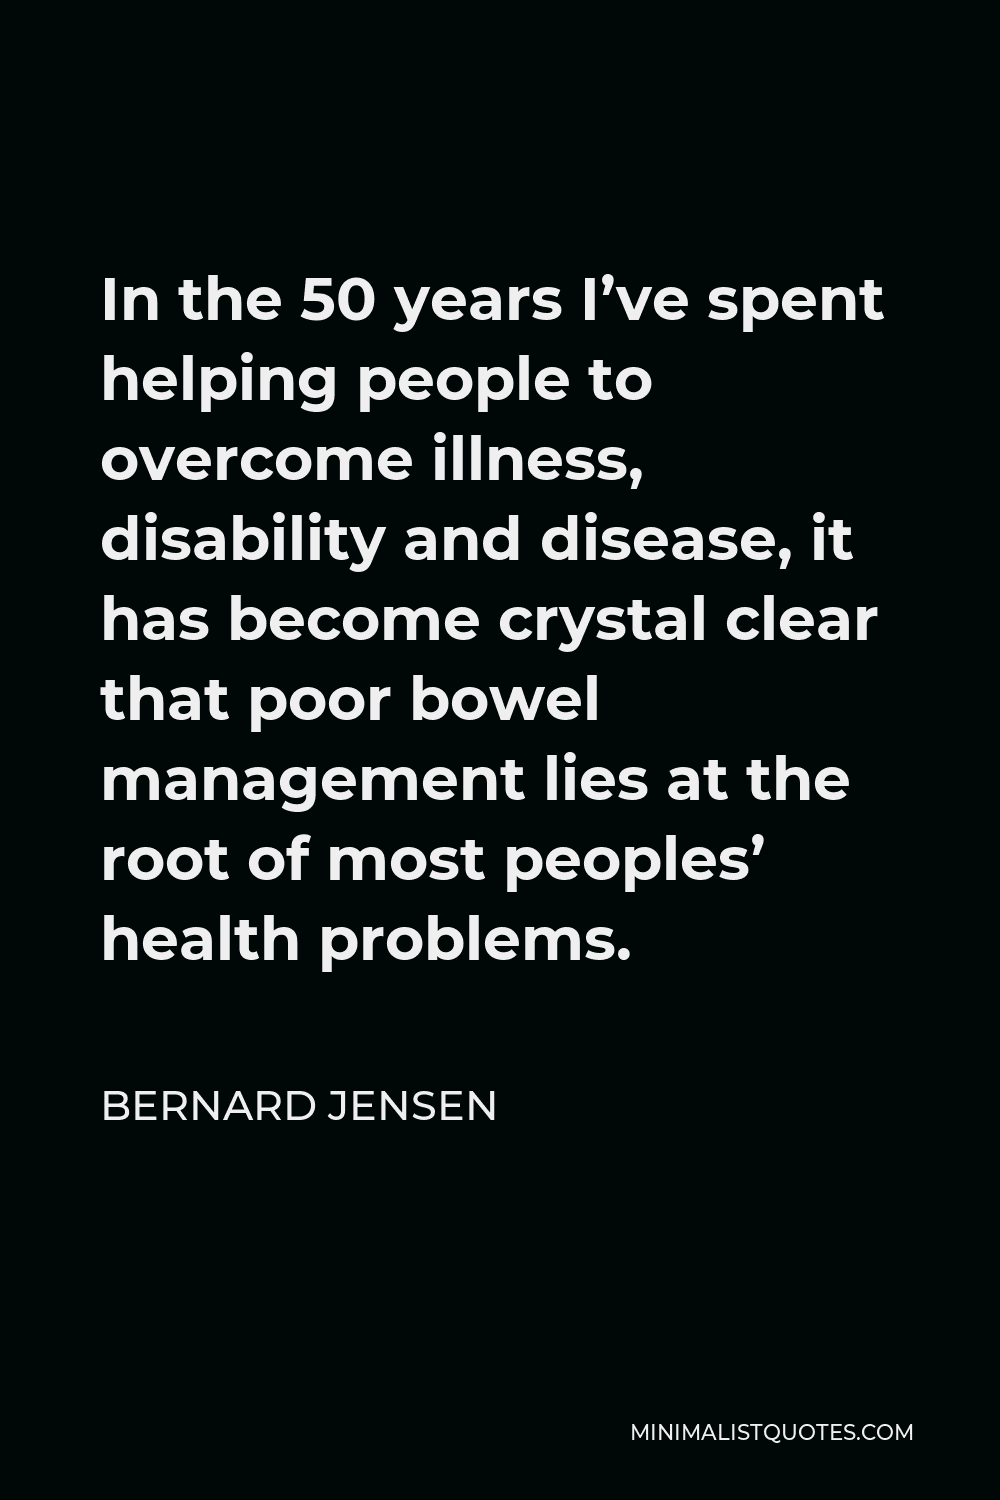 Bernard Jensen Quote - In the 50 years I’ve spent helping people to overcome illness, disability and disease, it has become crystal clear that poor bowel management lies at the root of most peoples’ health problems.